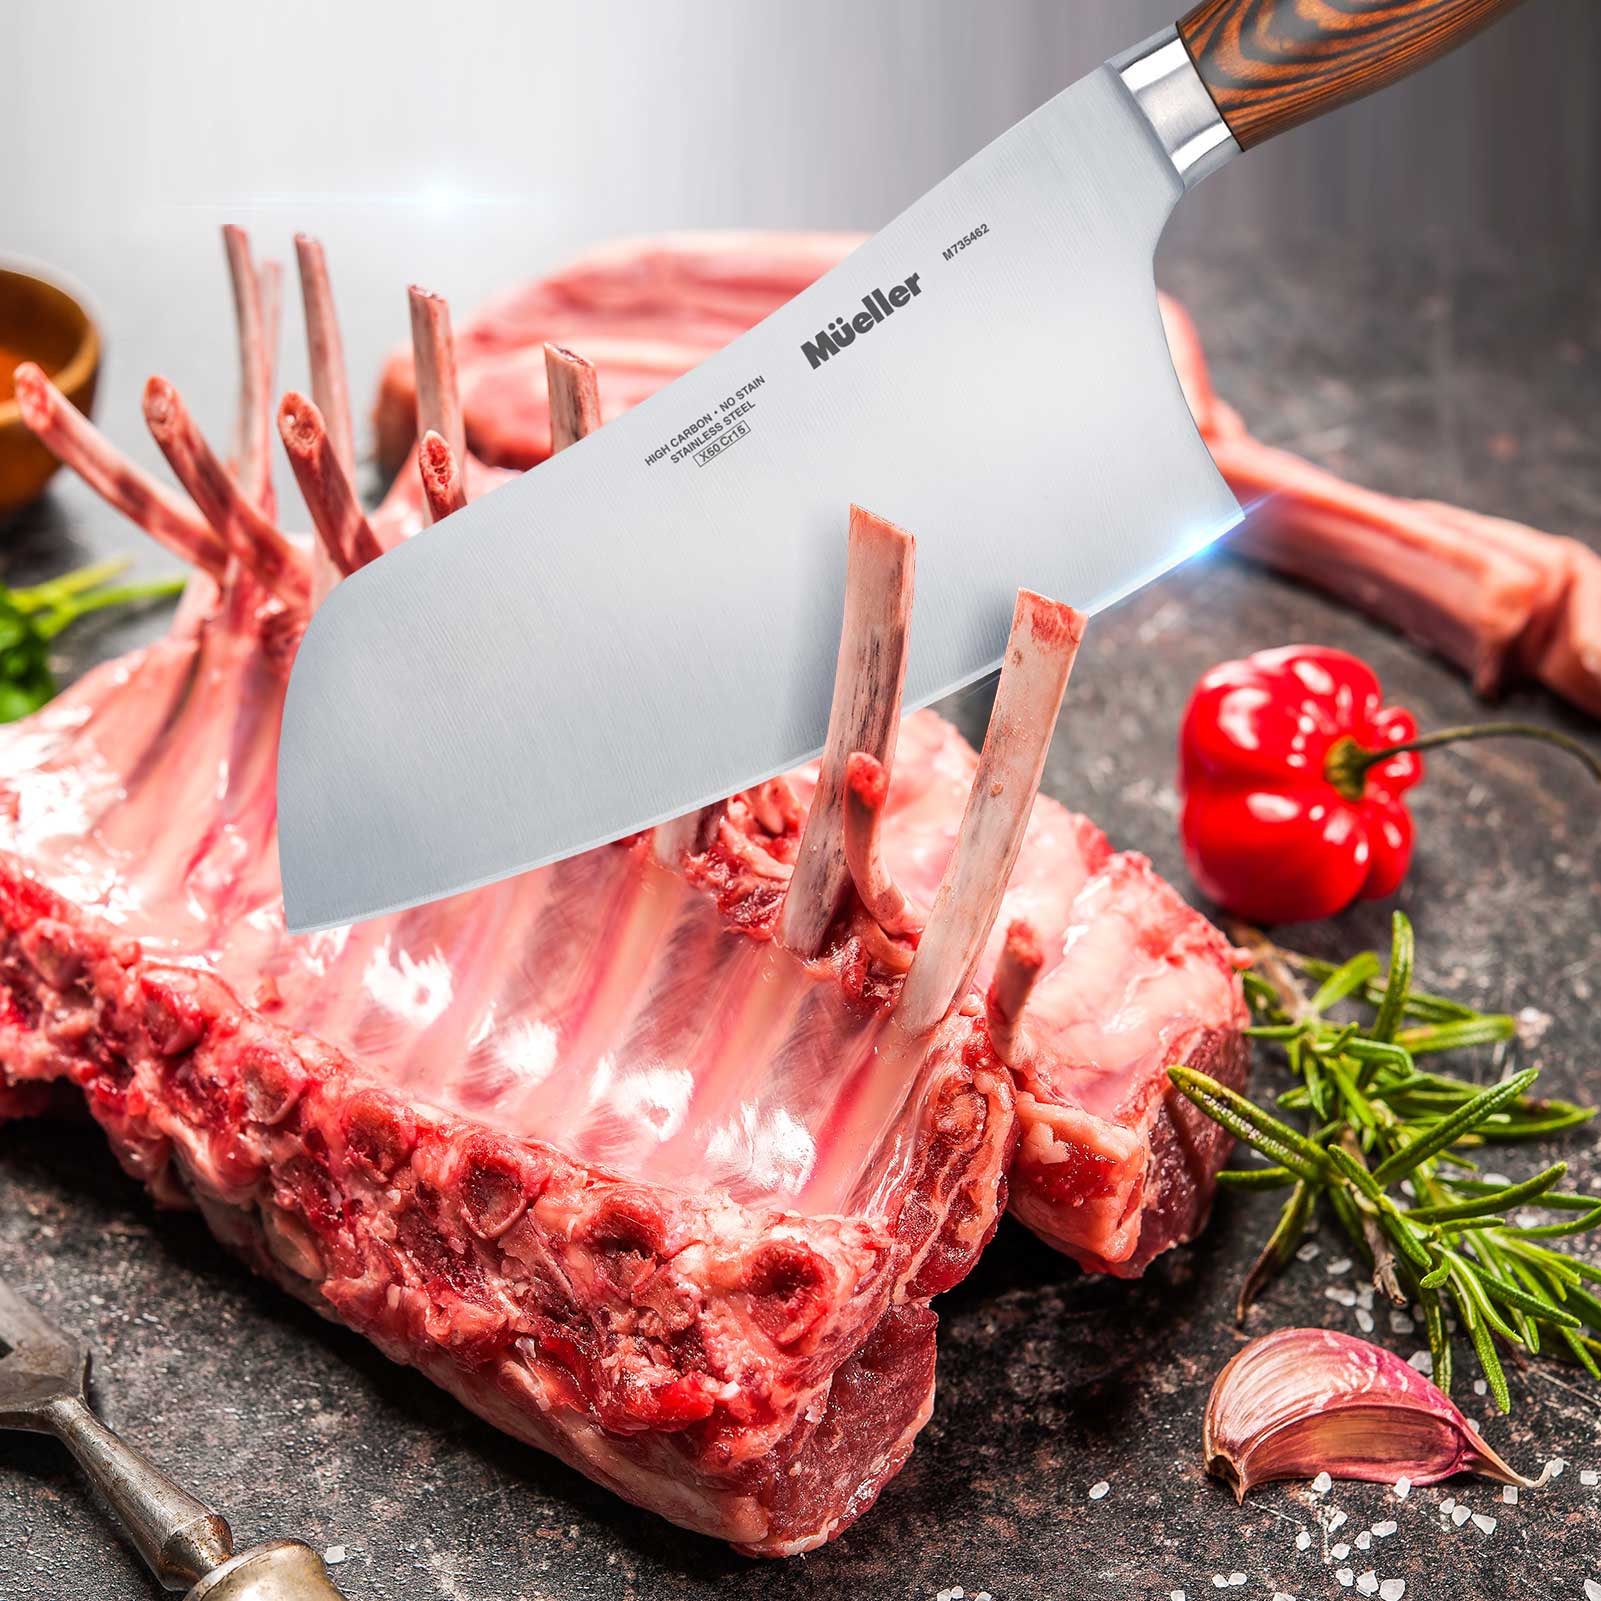 7-inch Stainless Steel Meat Cleaver Knife with Ergonomic Pakkawood